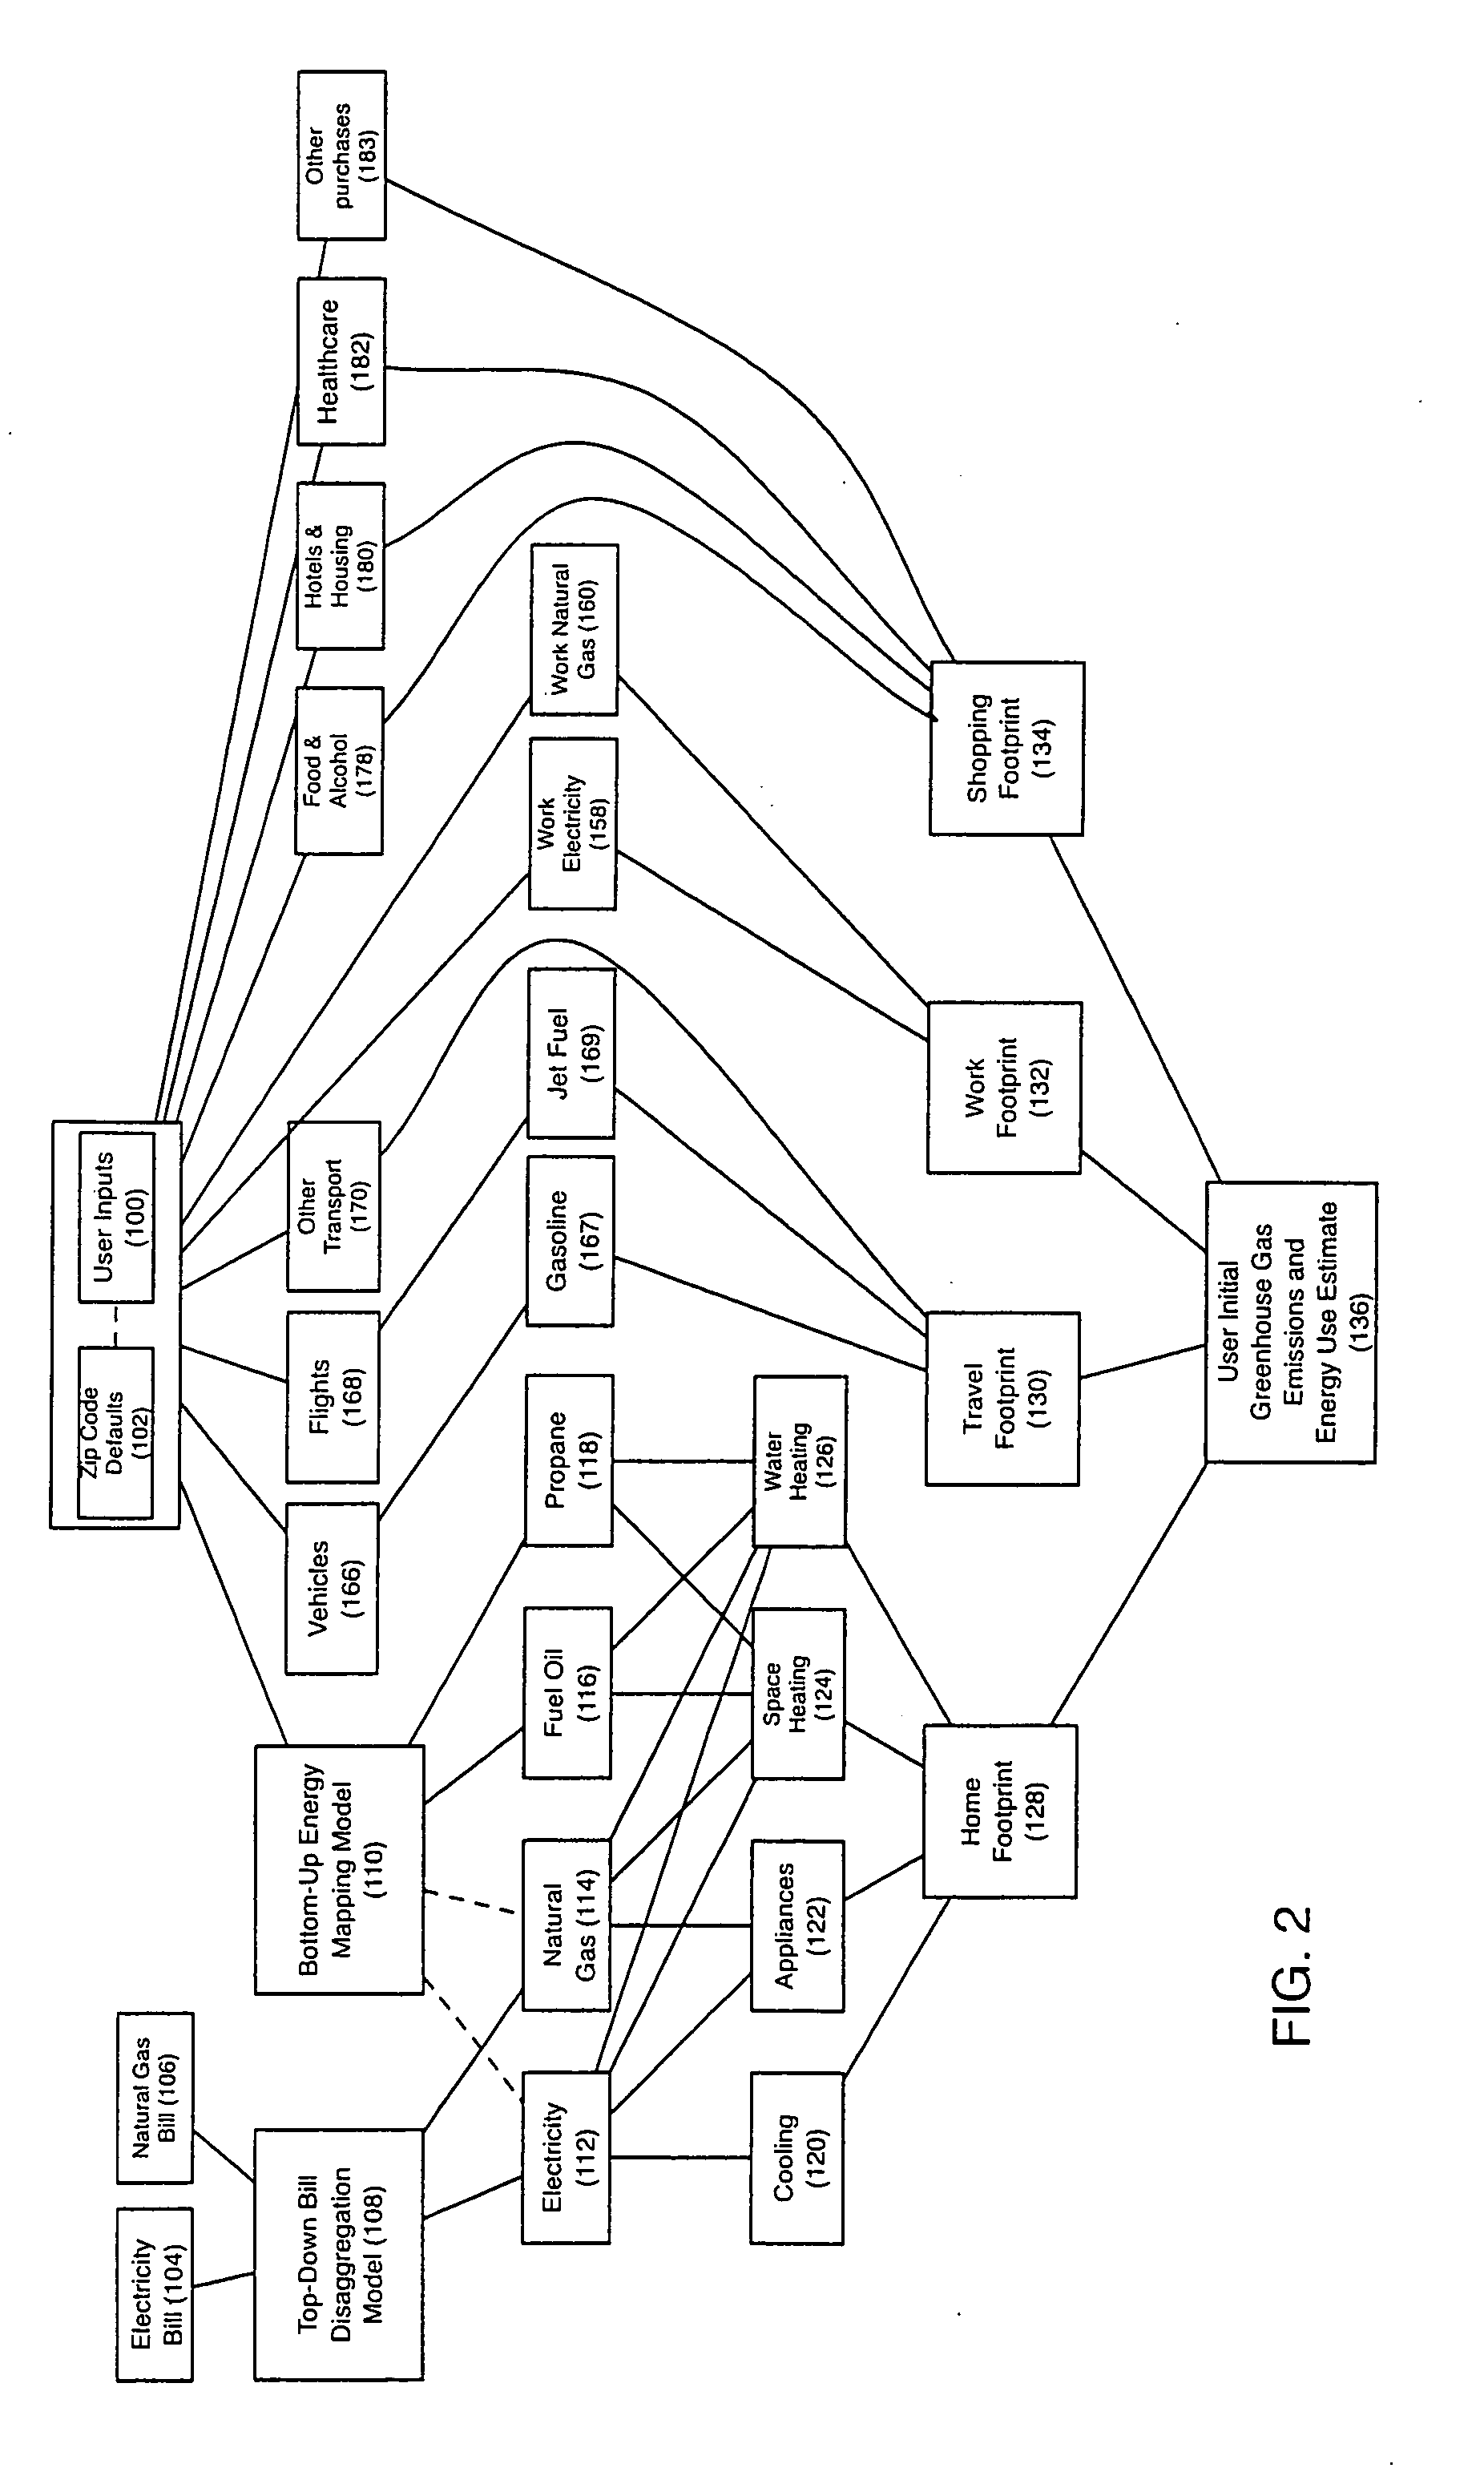 Methods and apparatus for greenhouse gas footprint monitoring